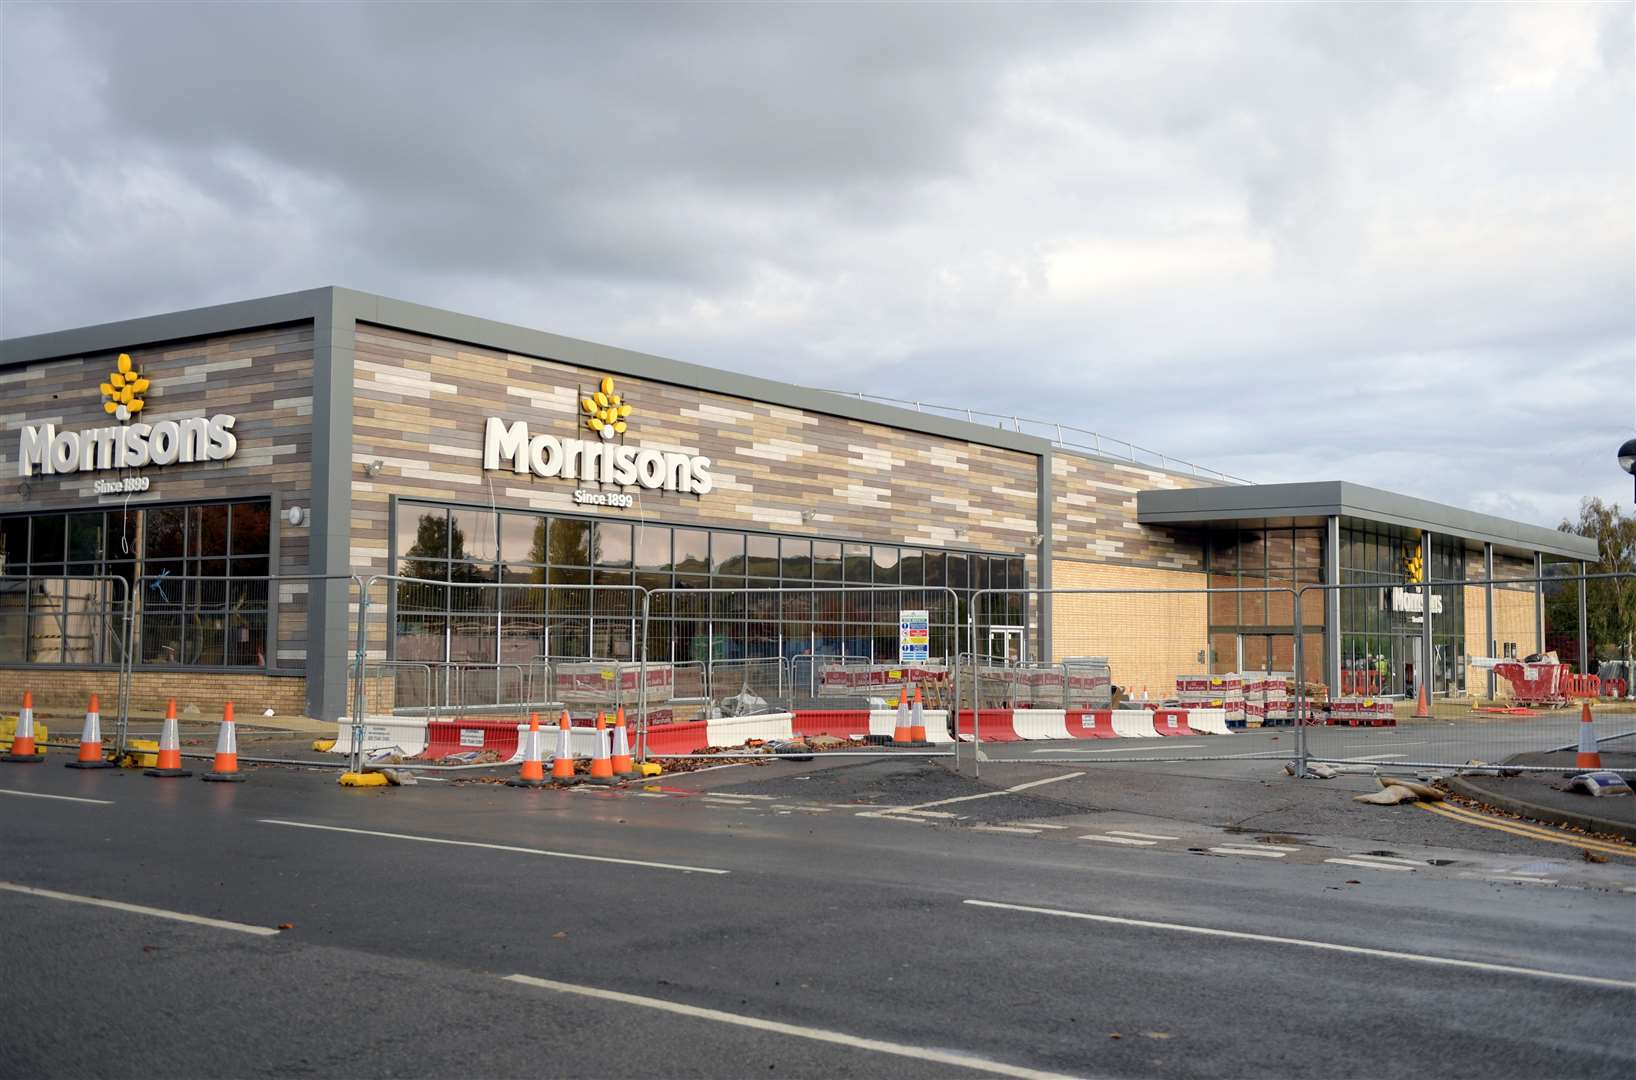 The new Morrisons opened one year after the blaze. Picture: Barry Goodwin